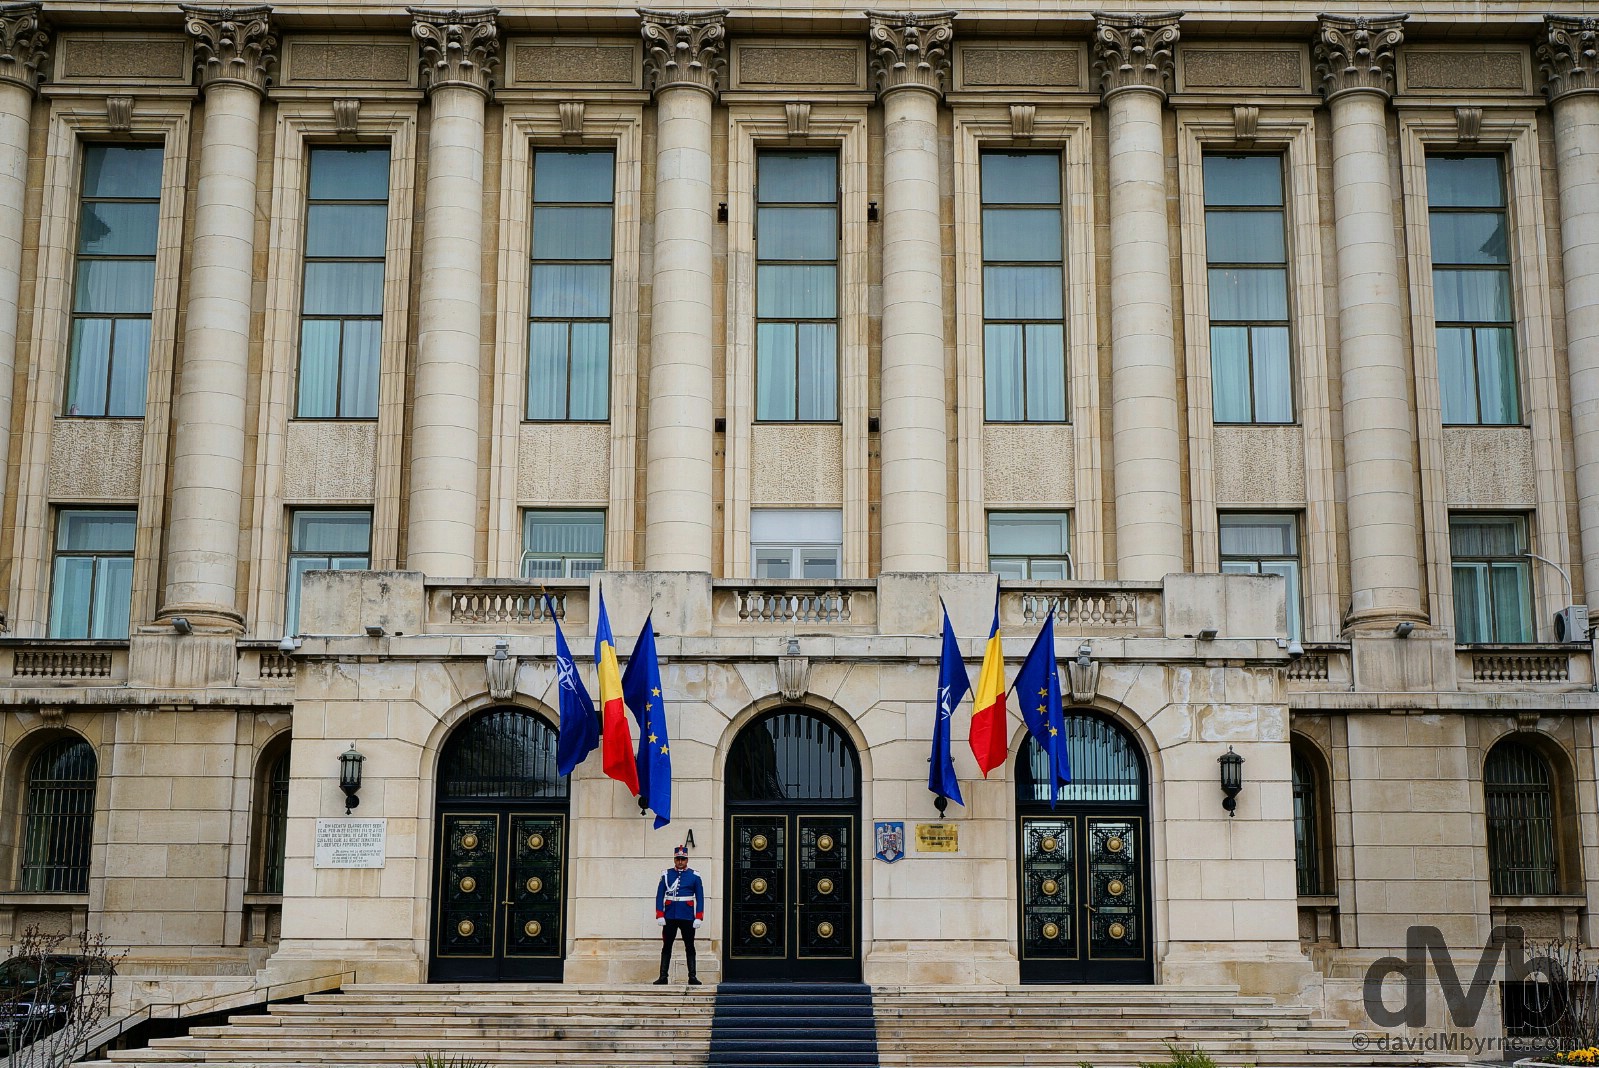 Outside the Former Central Committee Of The Communist Party Building off Piata Revolutiei (Revolution Square), Bucharest, Romania. April 1, 2015.